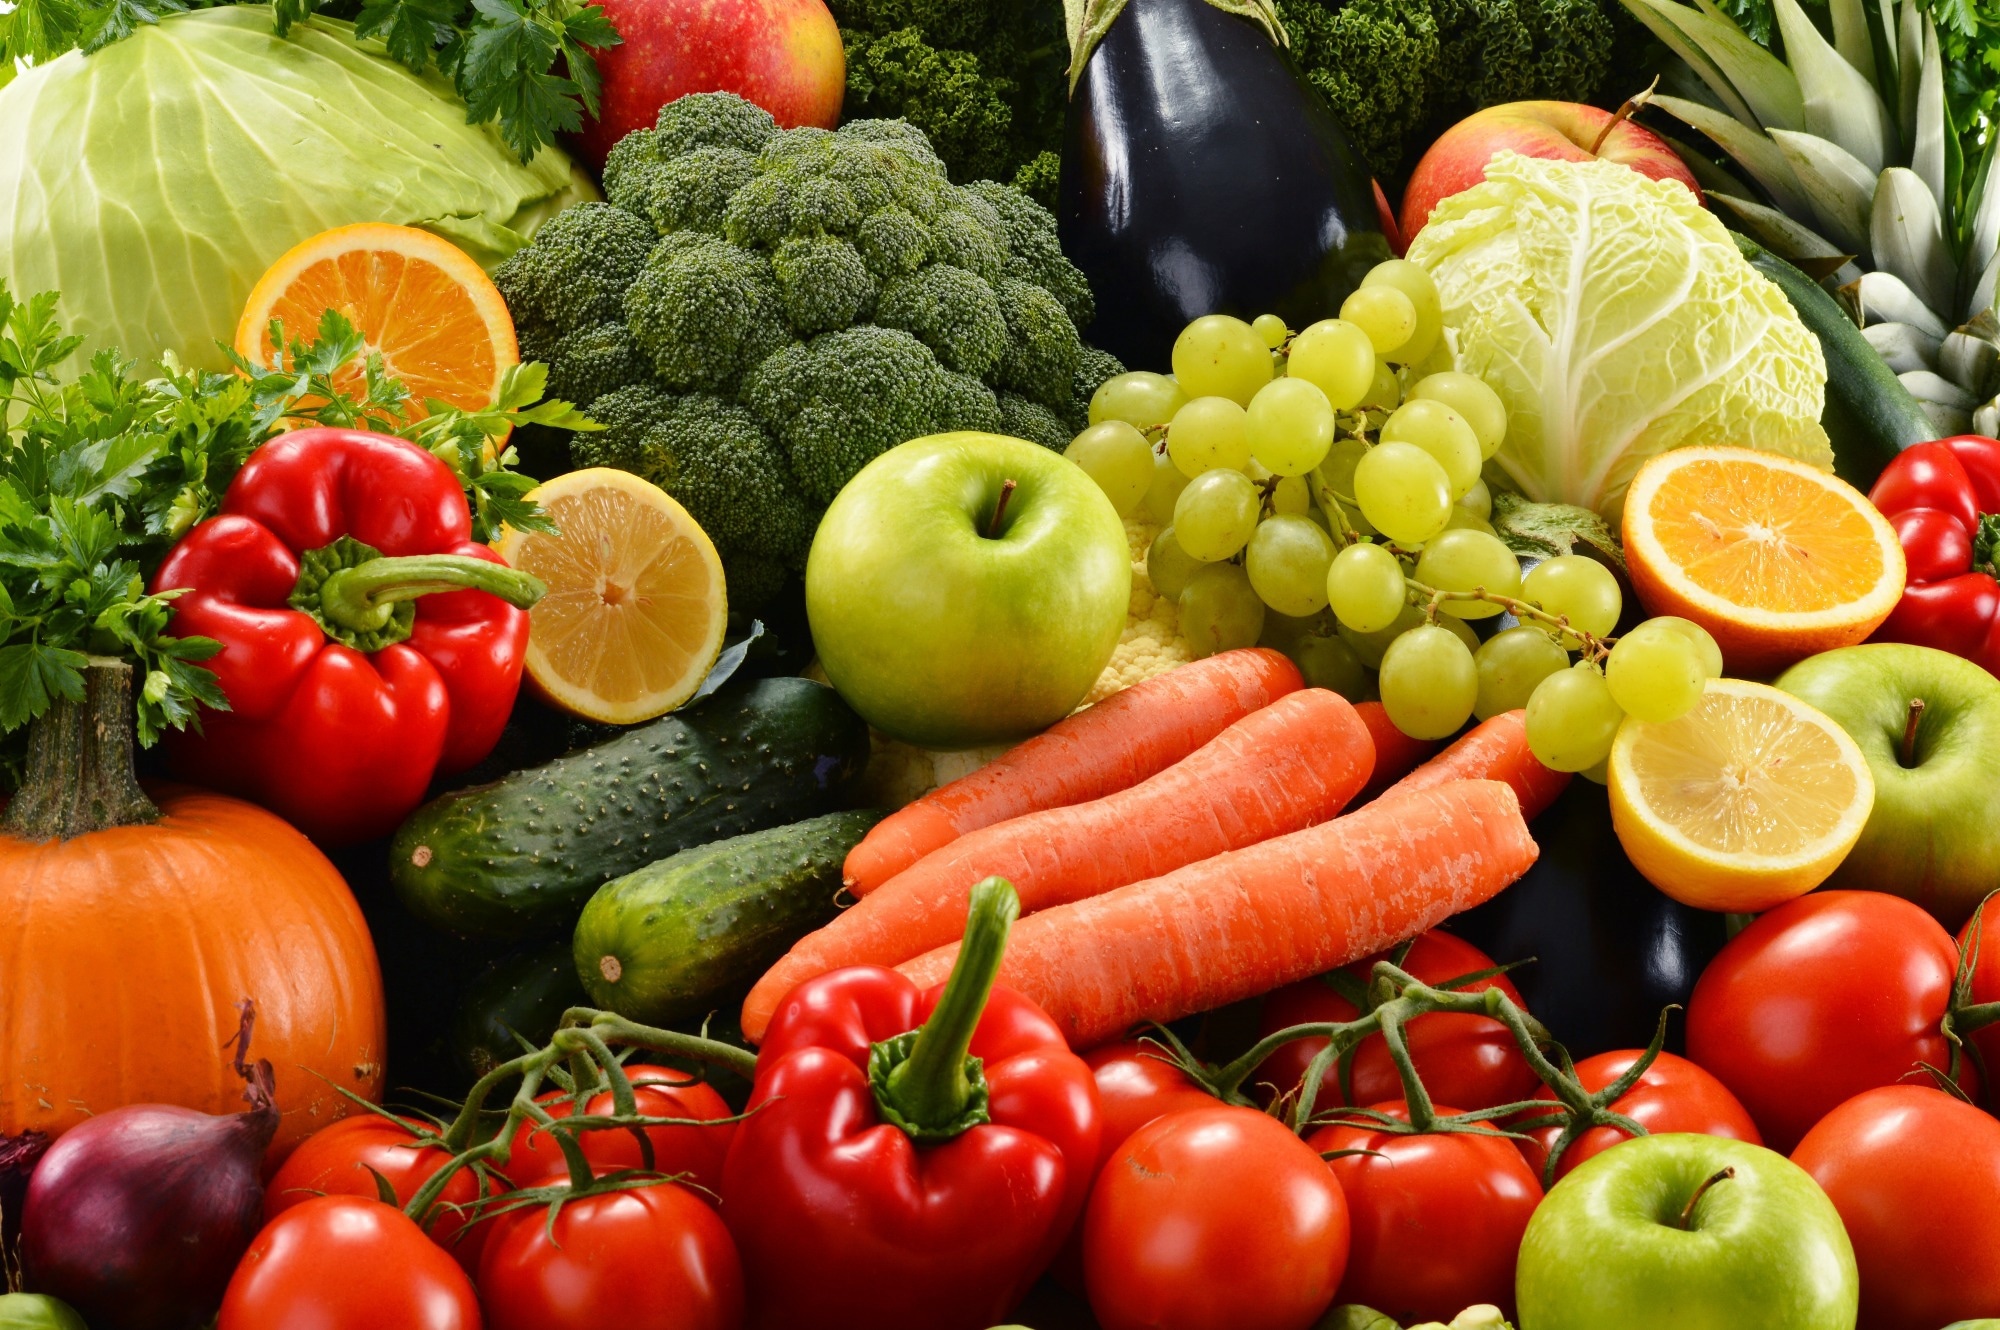 Study: Effects of an Eating Pattern Including Colorful Fruits and Vegetables on Management of Gestational Diabetes: A Randomized Controlled Trial. Image Credit: monticello/Shutterstock.com